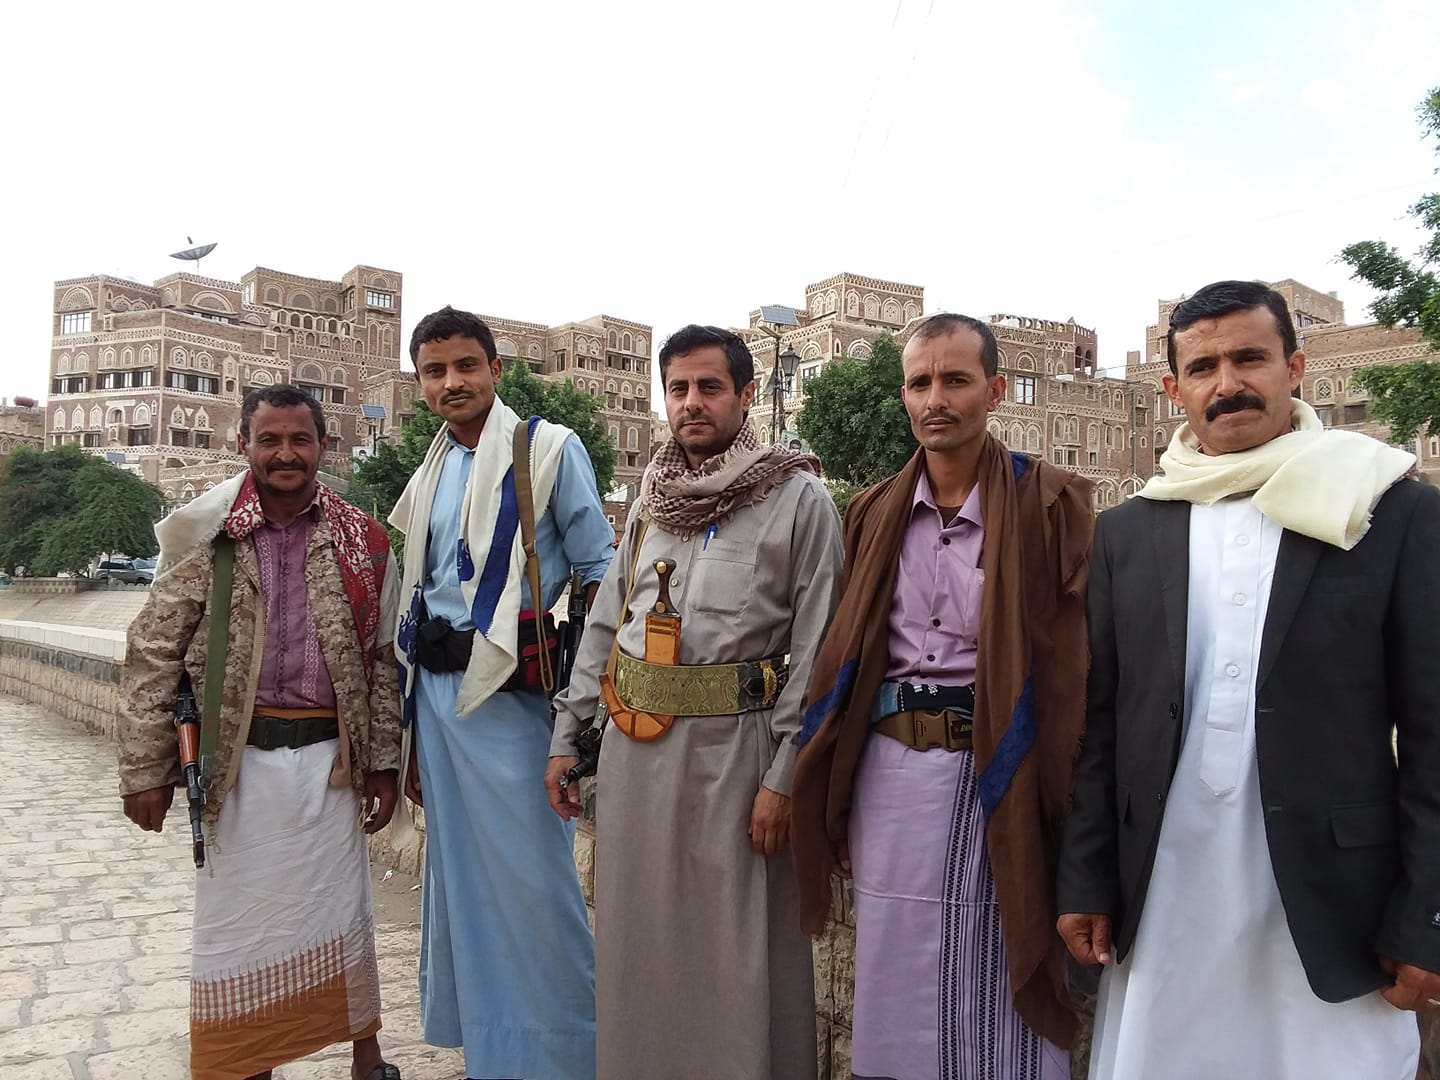 A photo posted by Houthi leader Mohammed al-Bukhaiti shows pro-Hadi leaders, including Ahmad Nasser al-Magnani (second from left) who have recently joined the Houthis (Facebook)